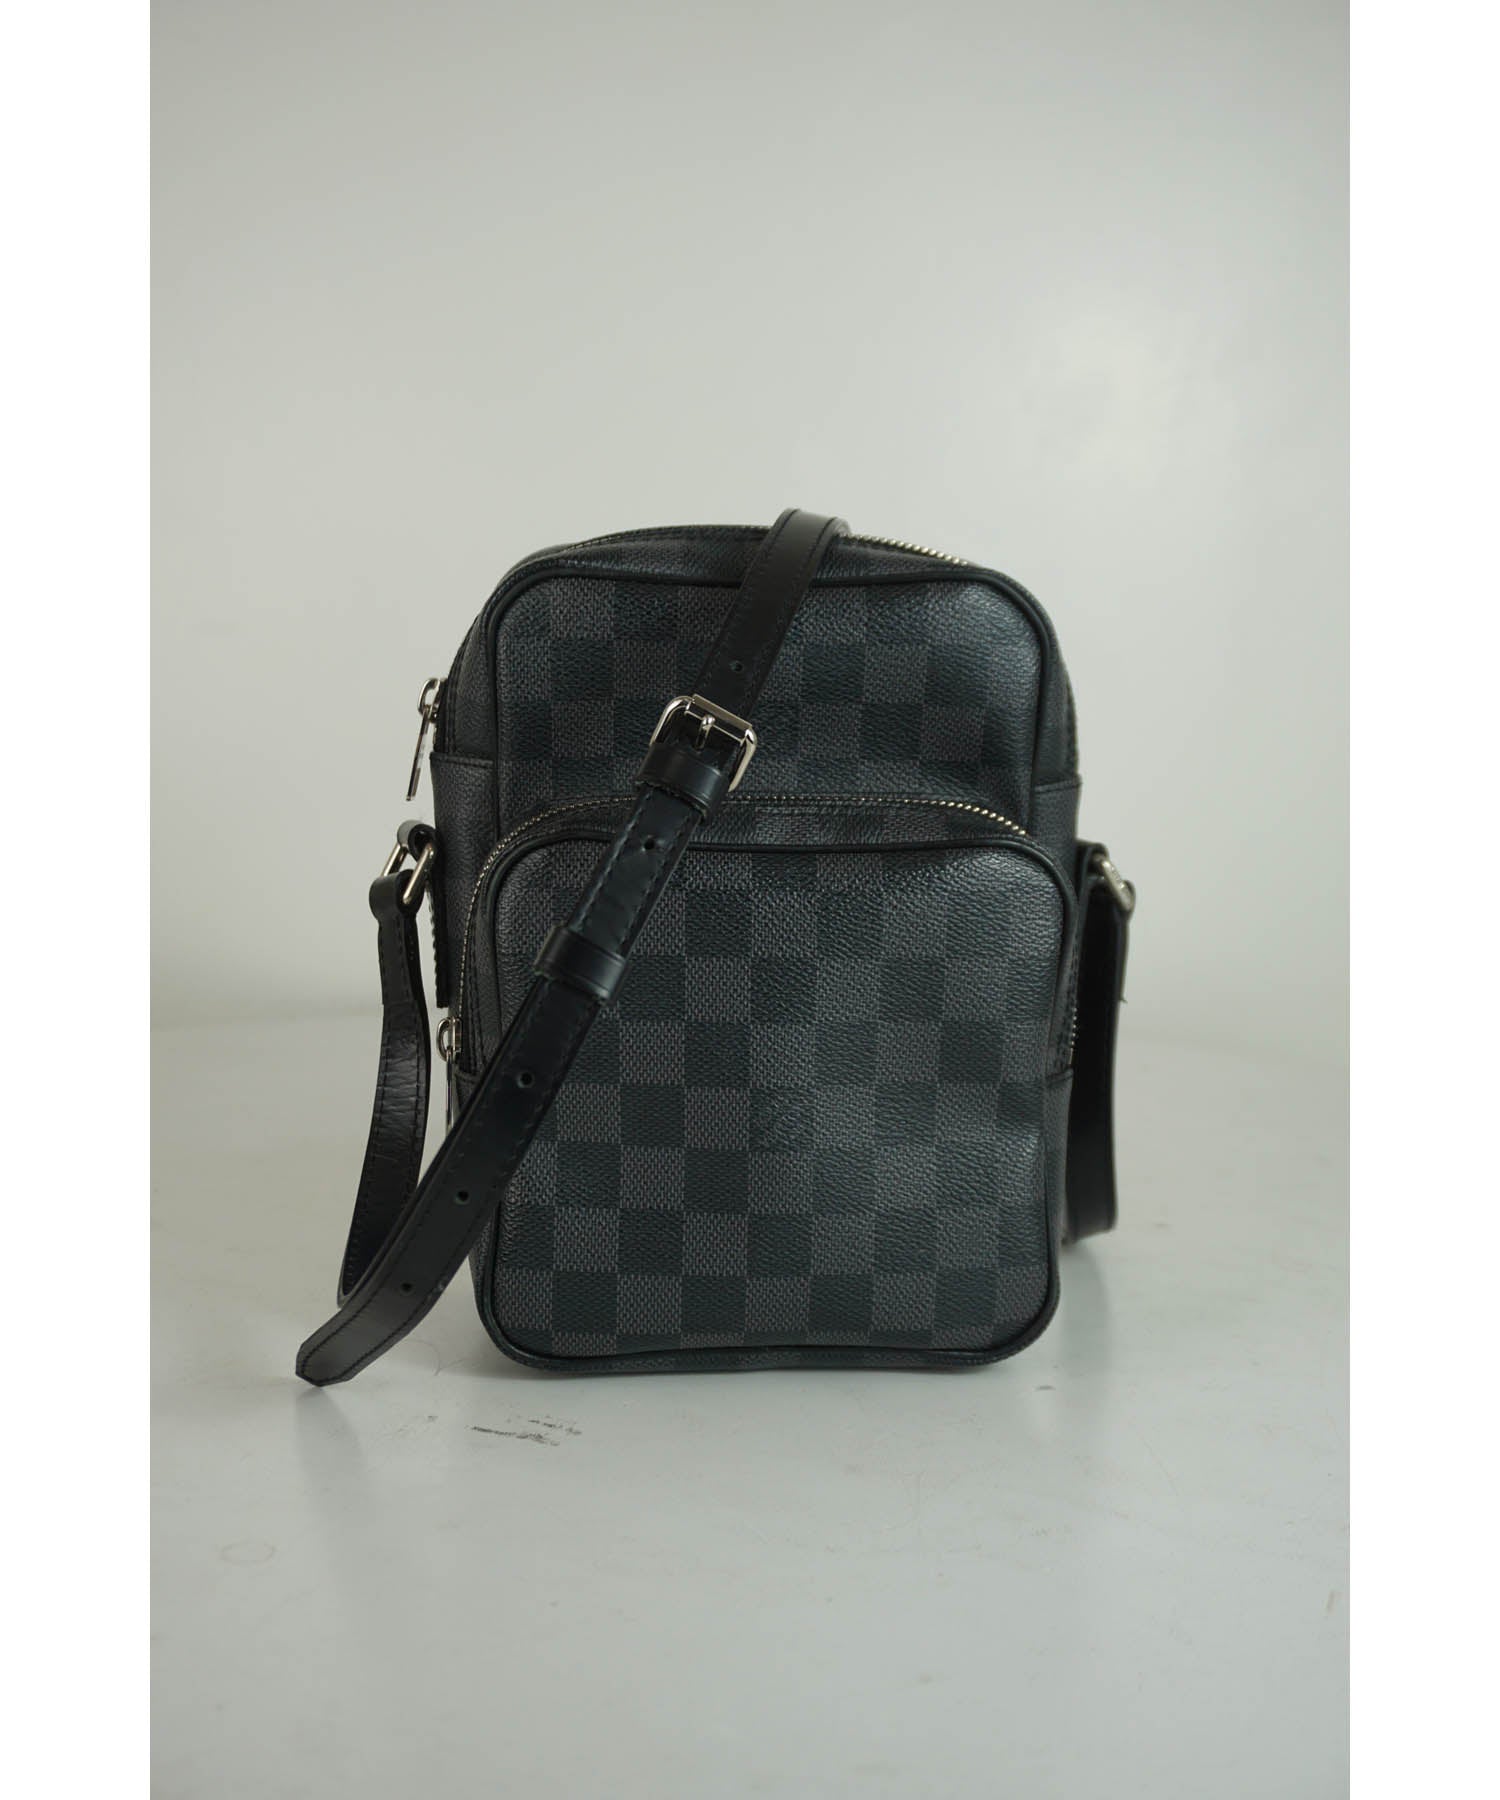 Louis Vuitton Black/Grey Damier Graphite Fabric and Leather Lace